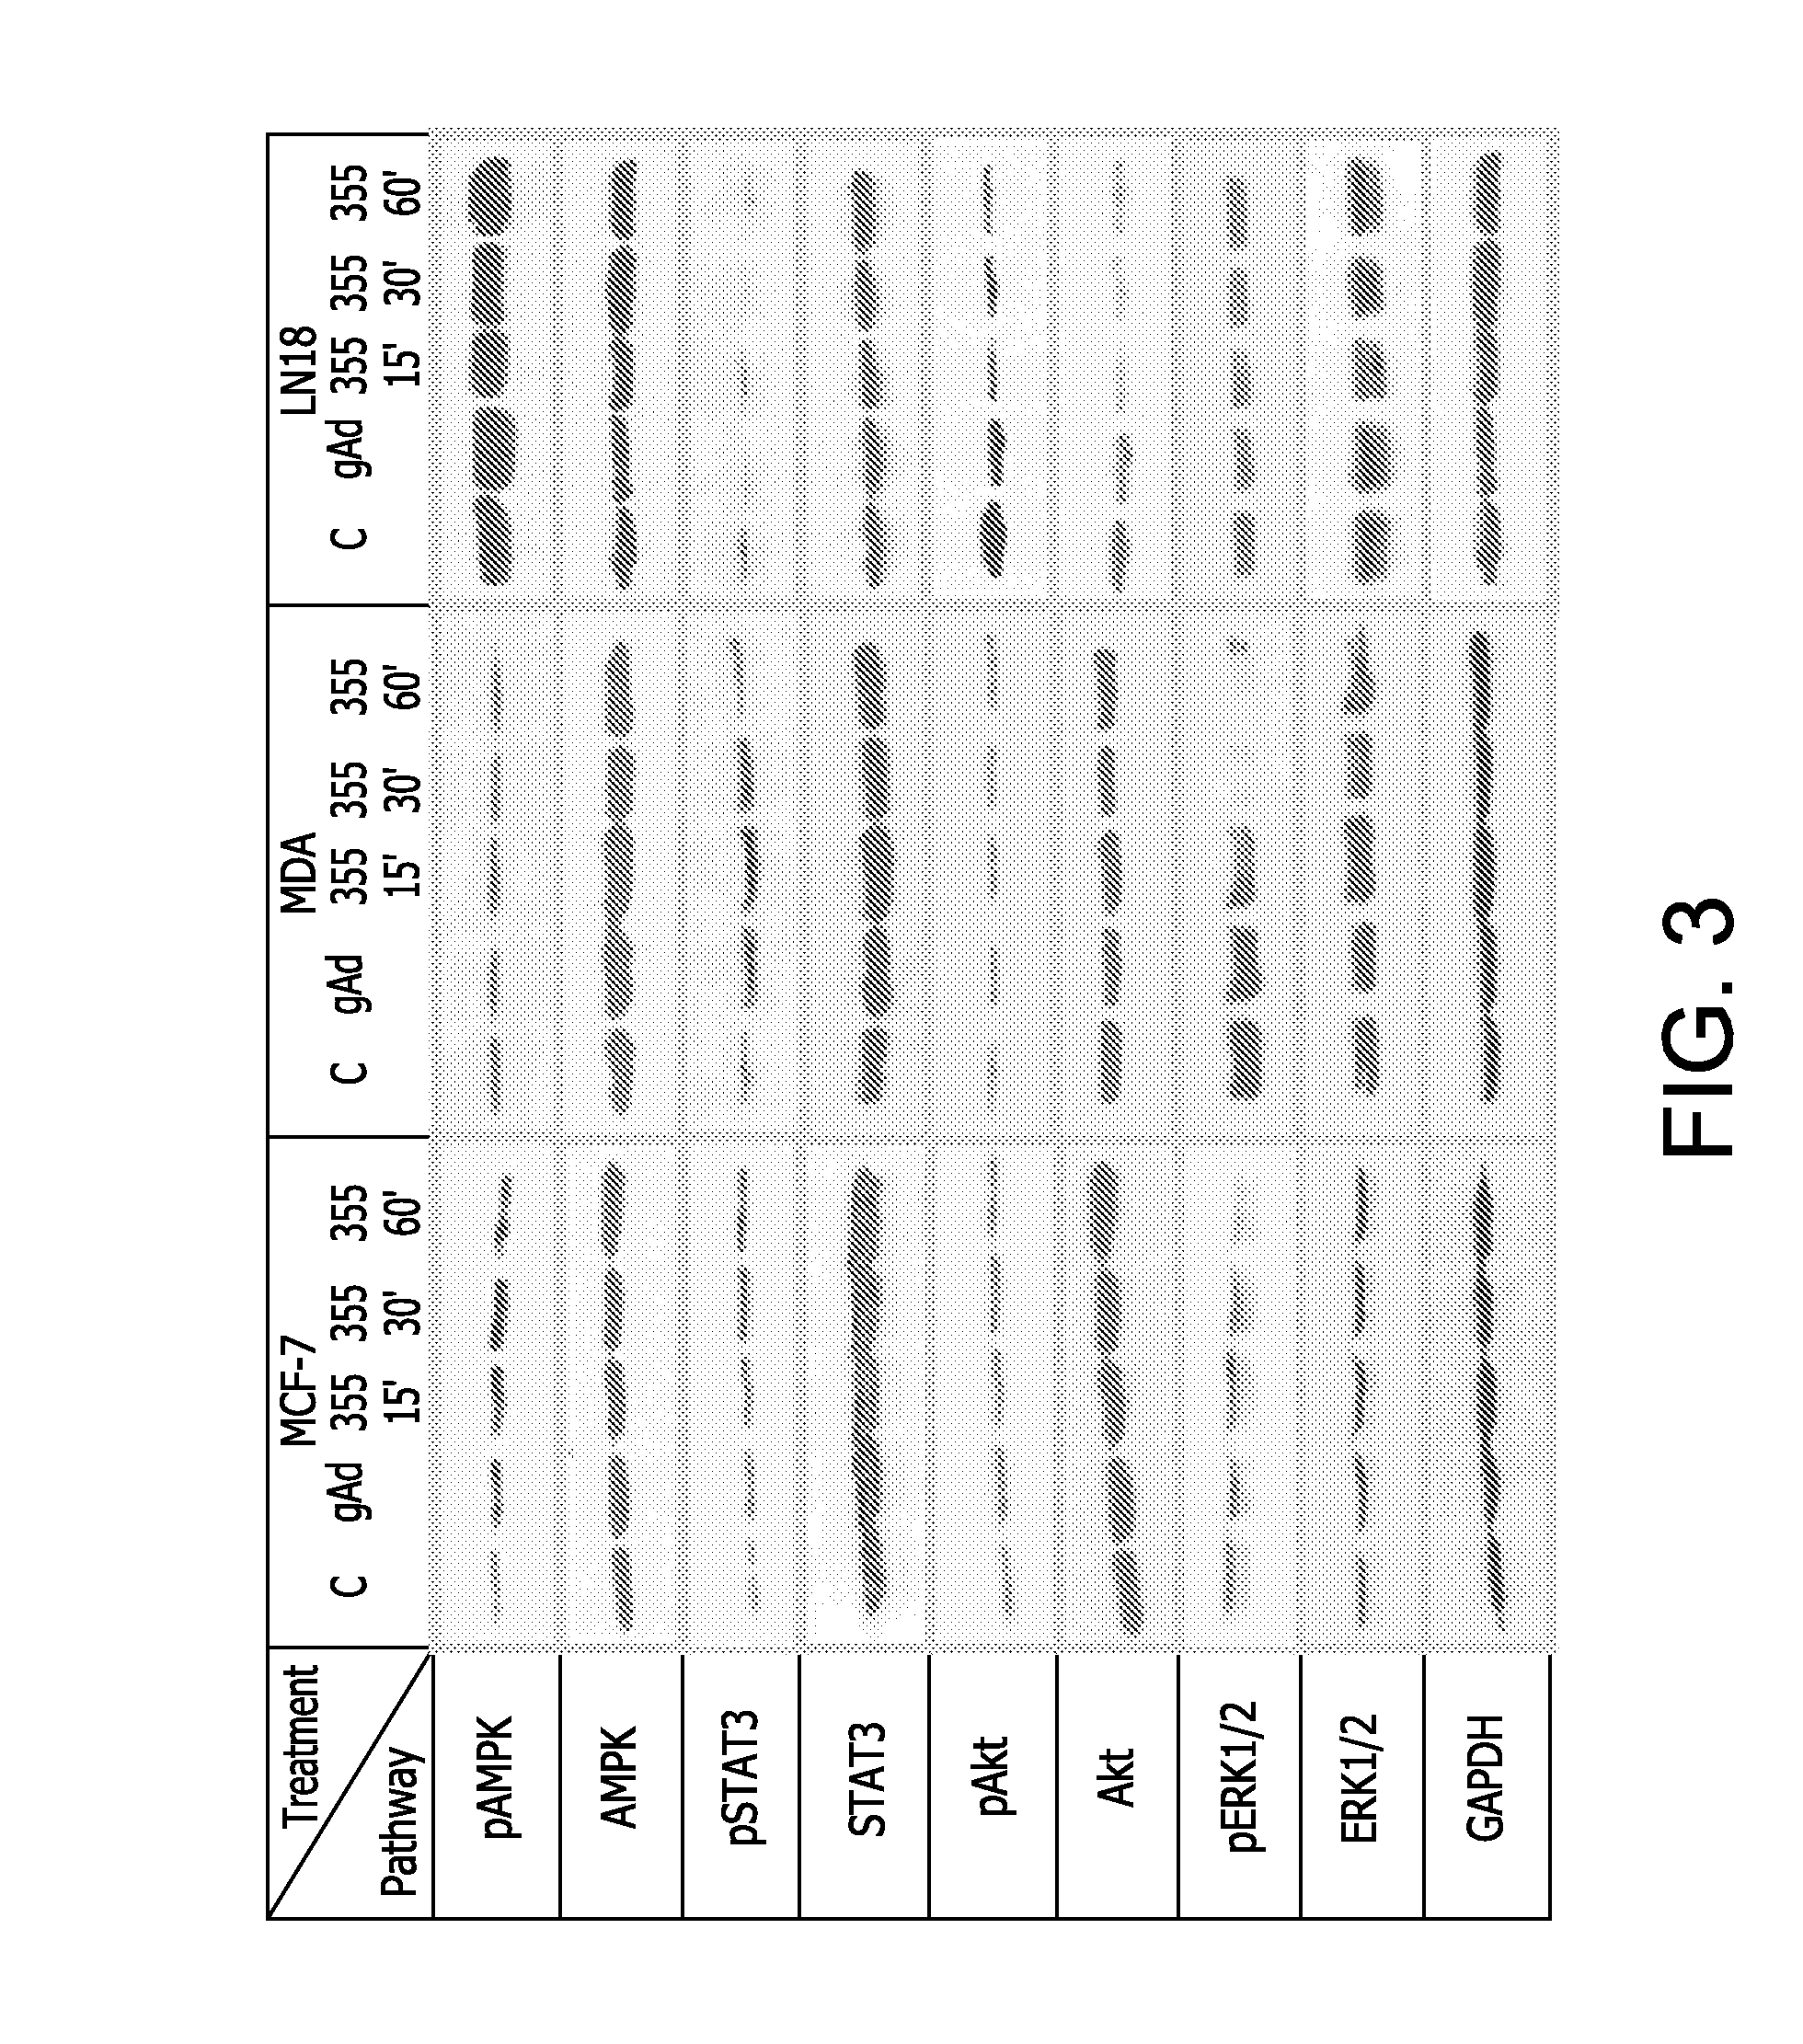 Adiponectin receptor agonists and methods of use